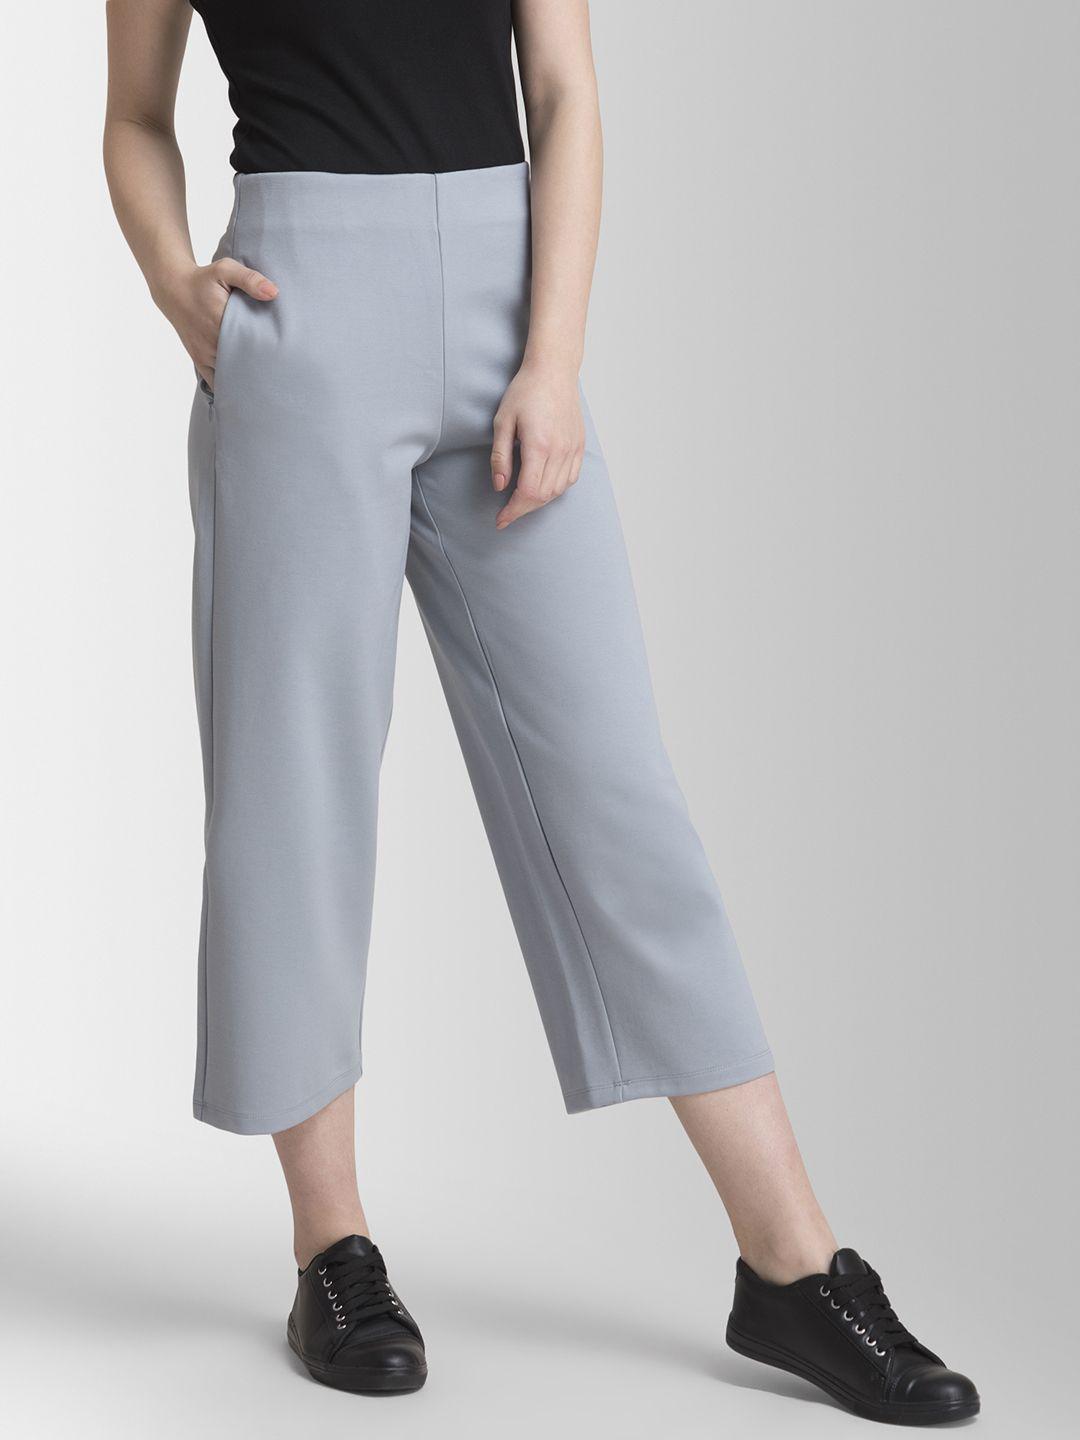 fablestreet women grey loose fit solid culottes